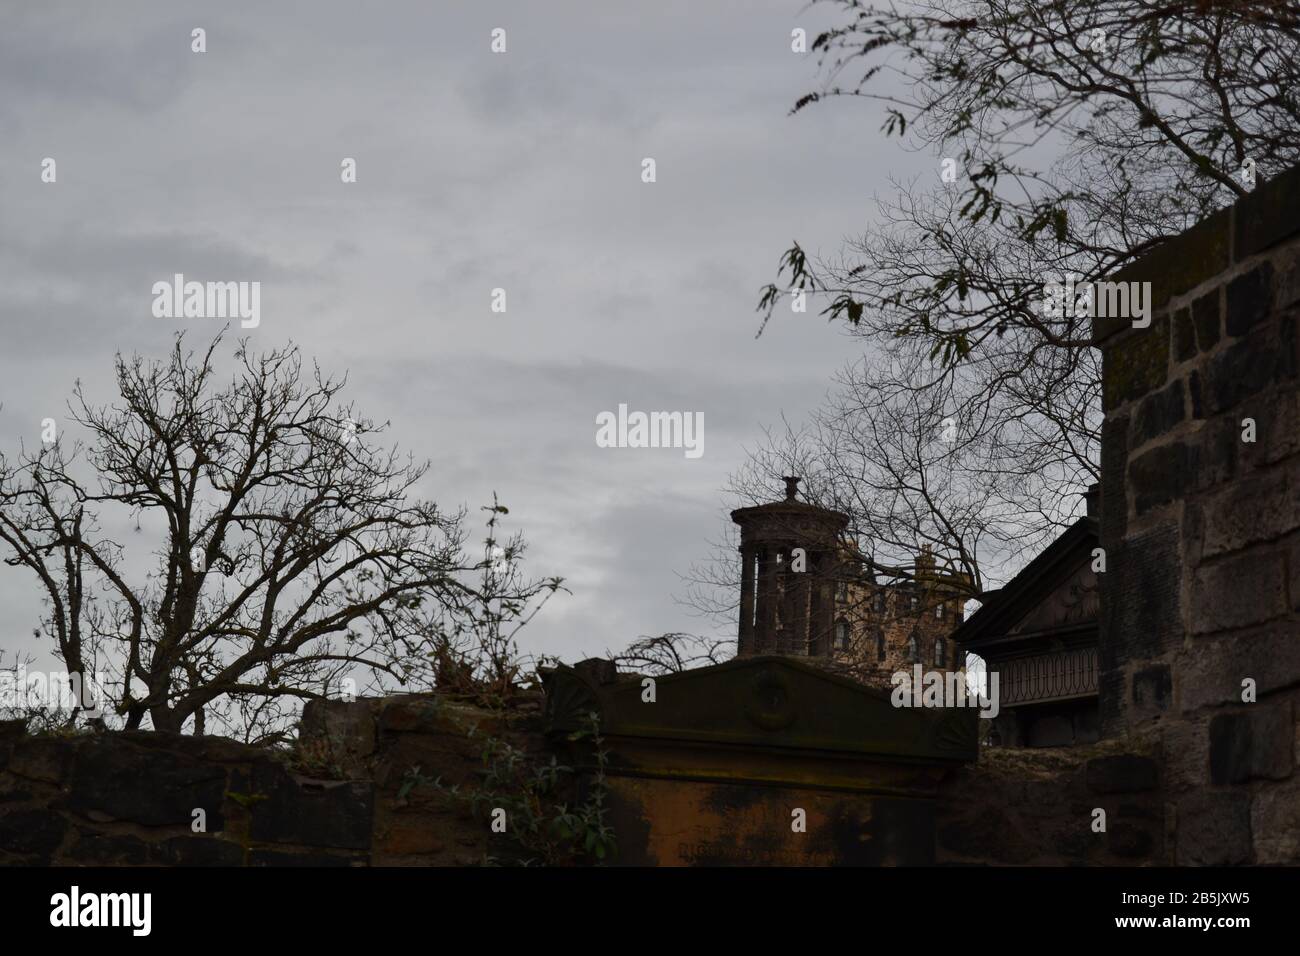 This image represents Calton hill, a public park overlooking the city, made from Old Calton Cemetery. Stock Photo